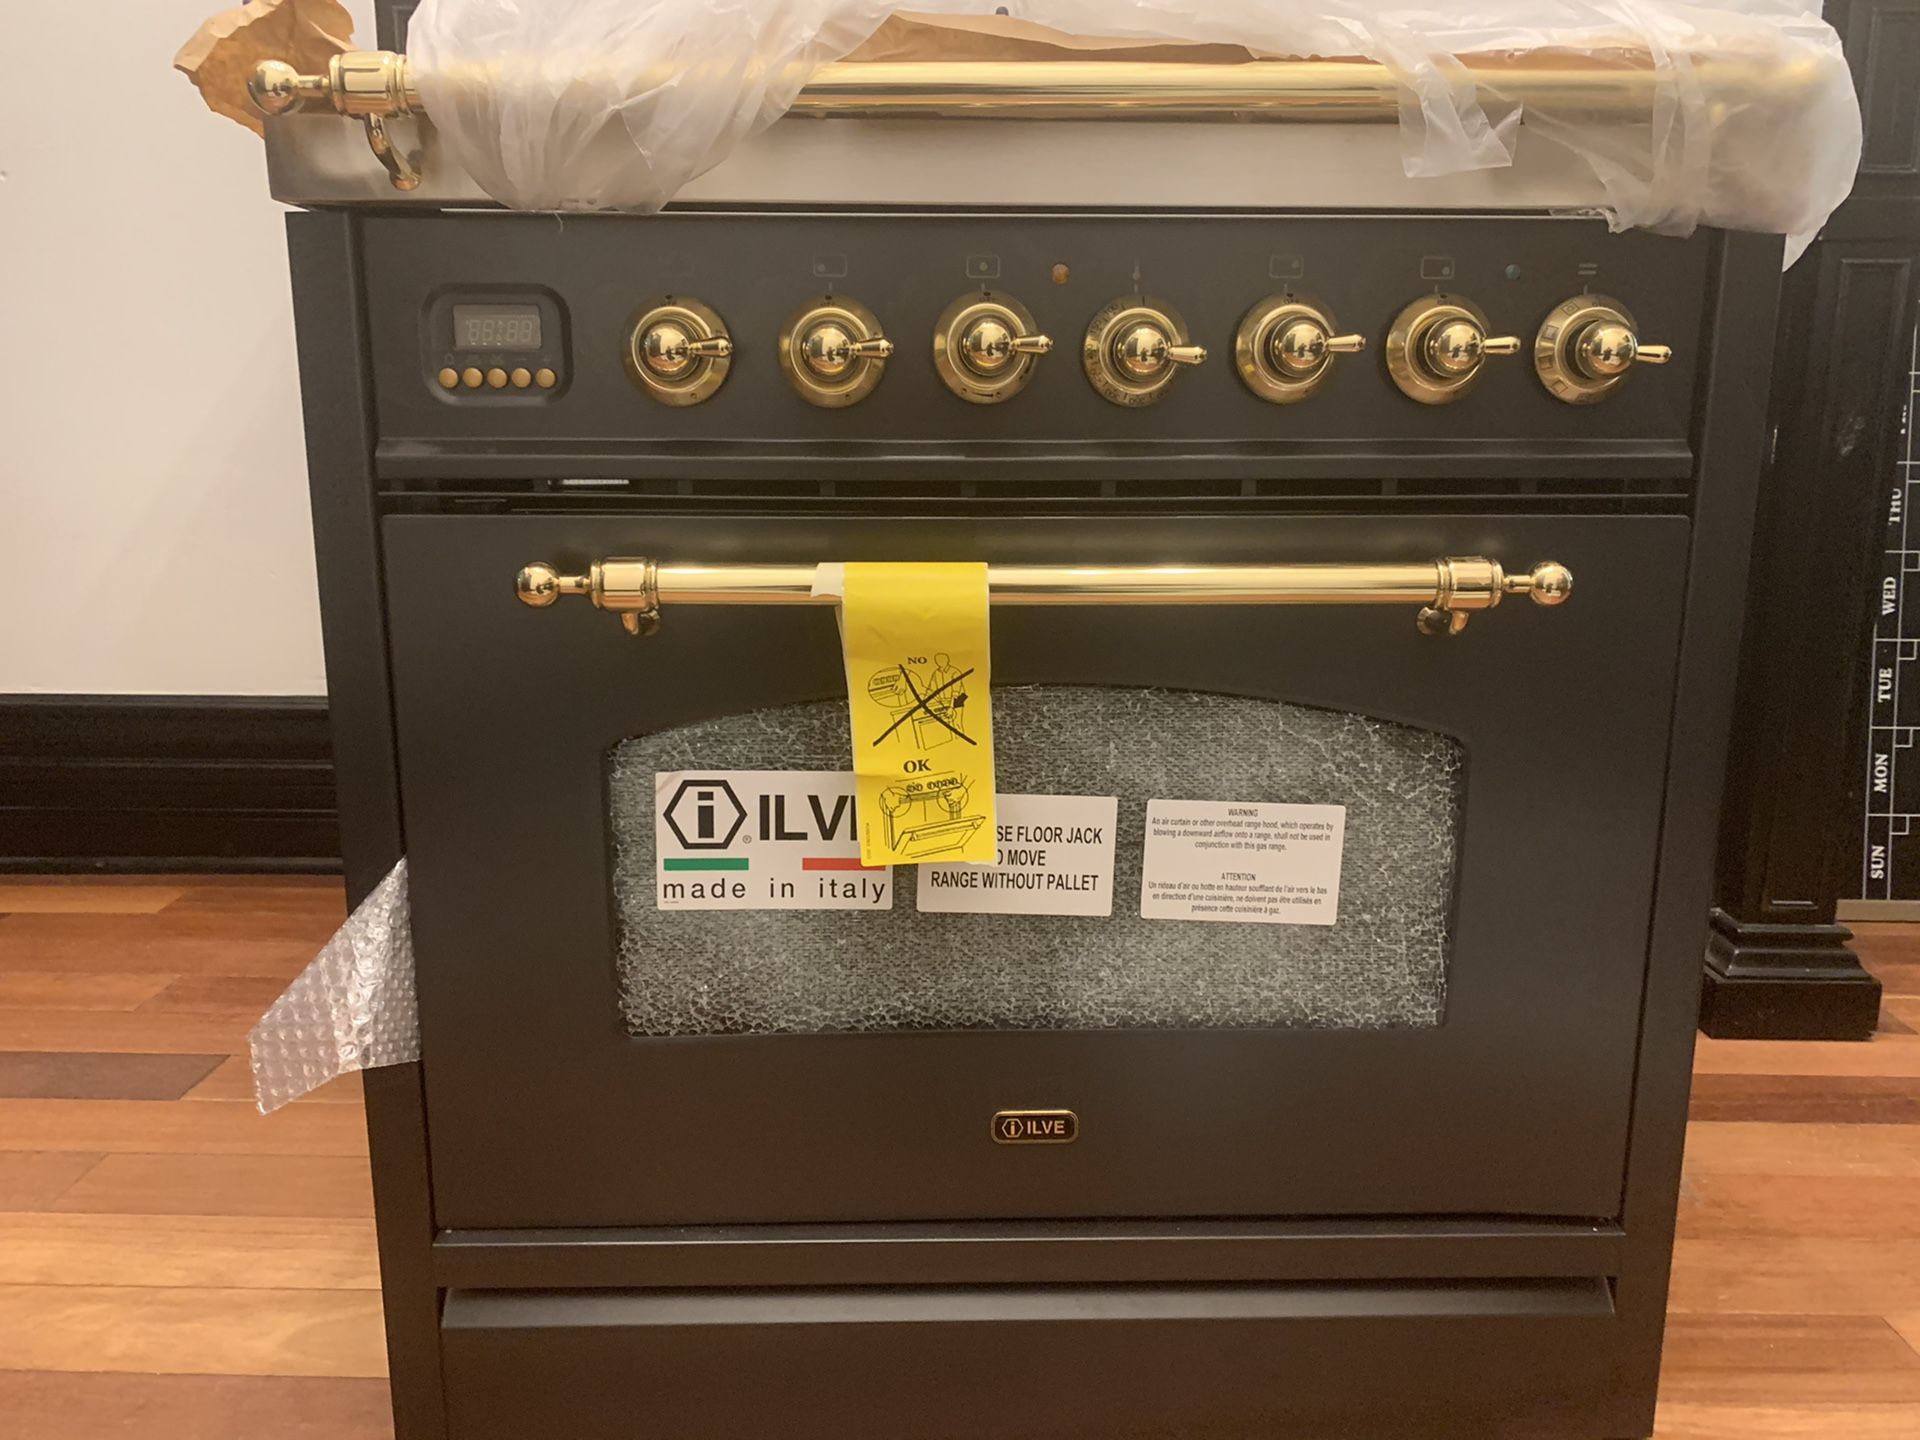 ILVE Nostalgie Series 30" 3 cu.ft. Freestanding Duel Fuel Range in matte graphite/ Brass. Brand new gas cooktop with electric stove (dual fuel).